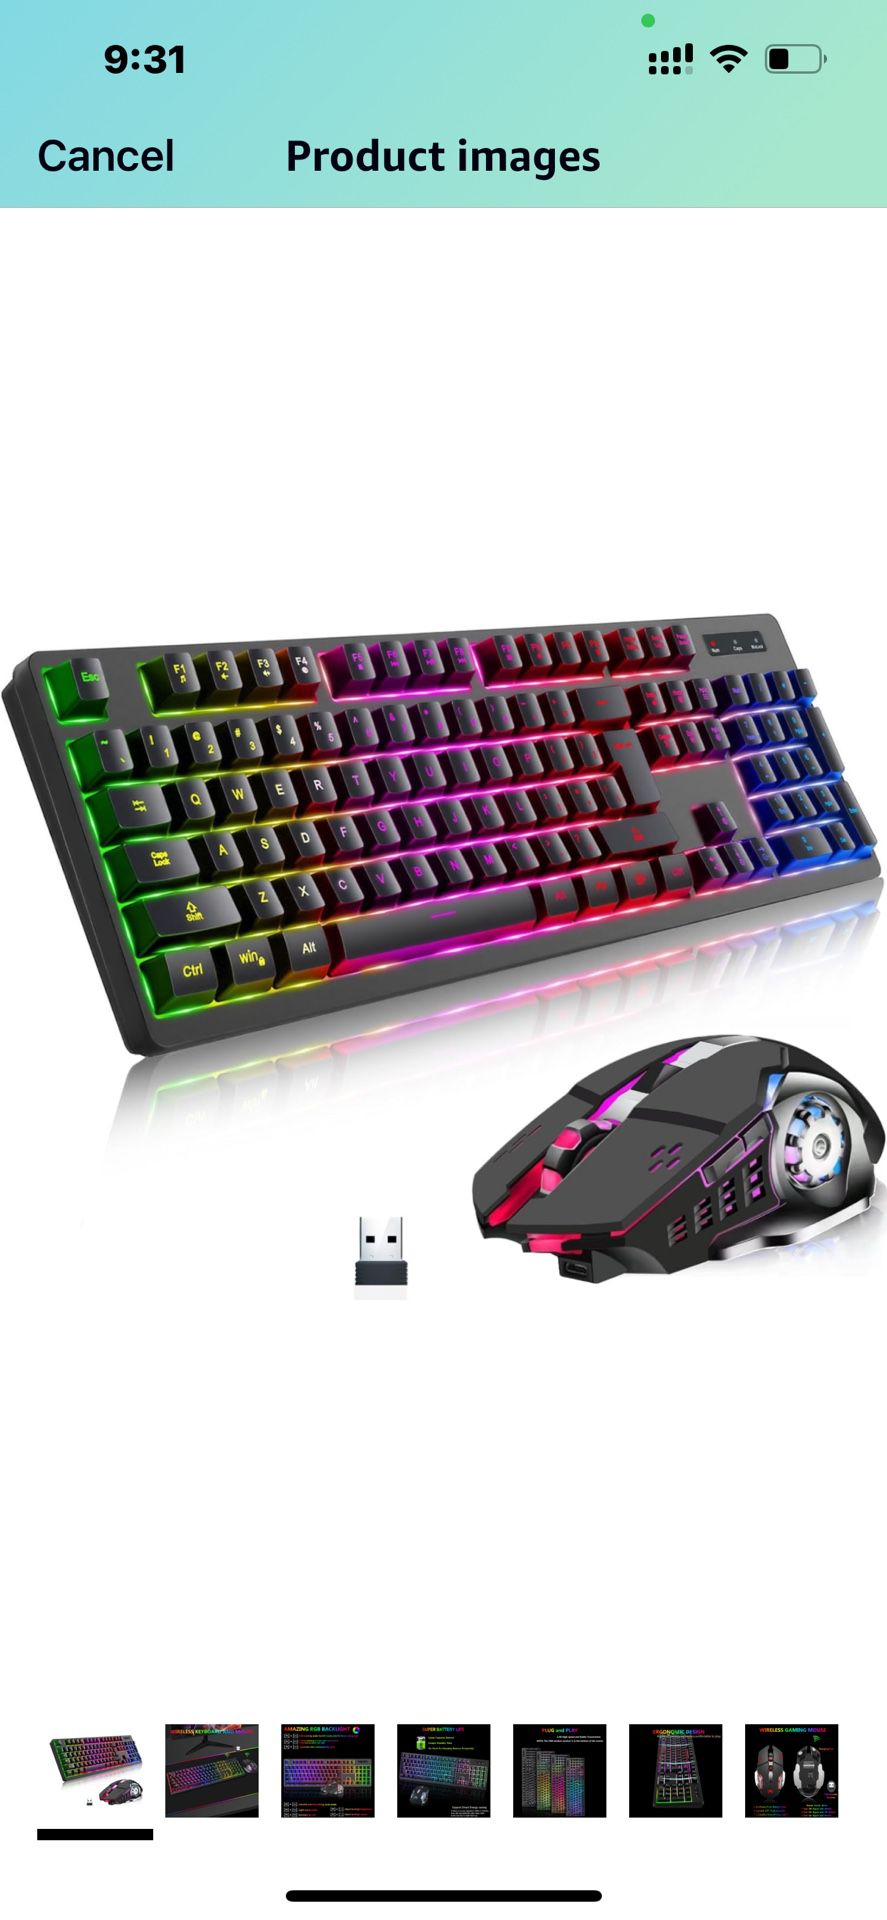 Wireless RGB Gaming Keyboard and Mouse - Rechargeable RGB Backlit Keyboard Mouse Long Battery Life